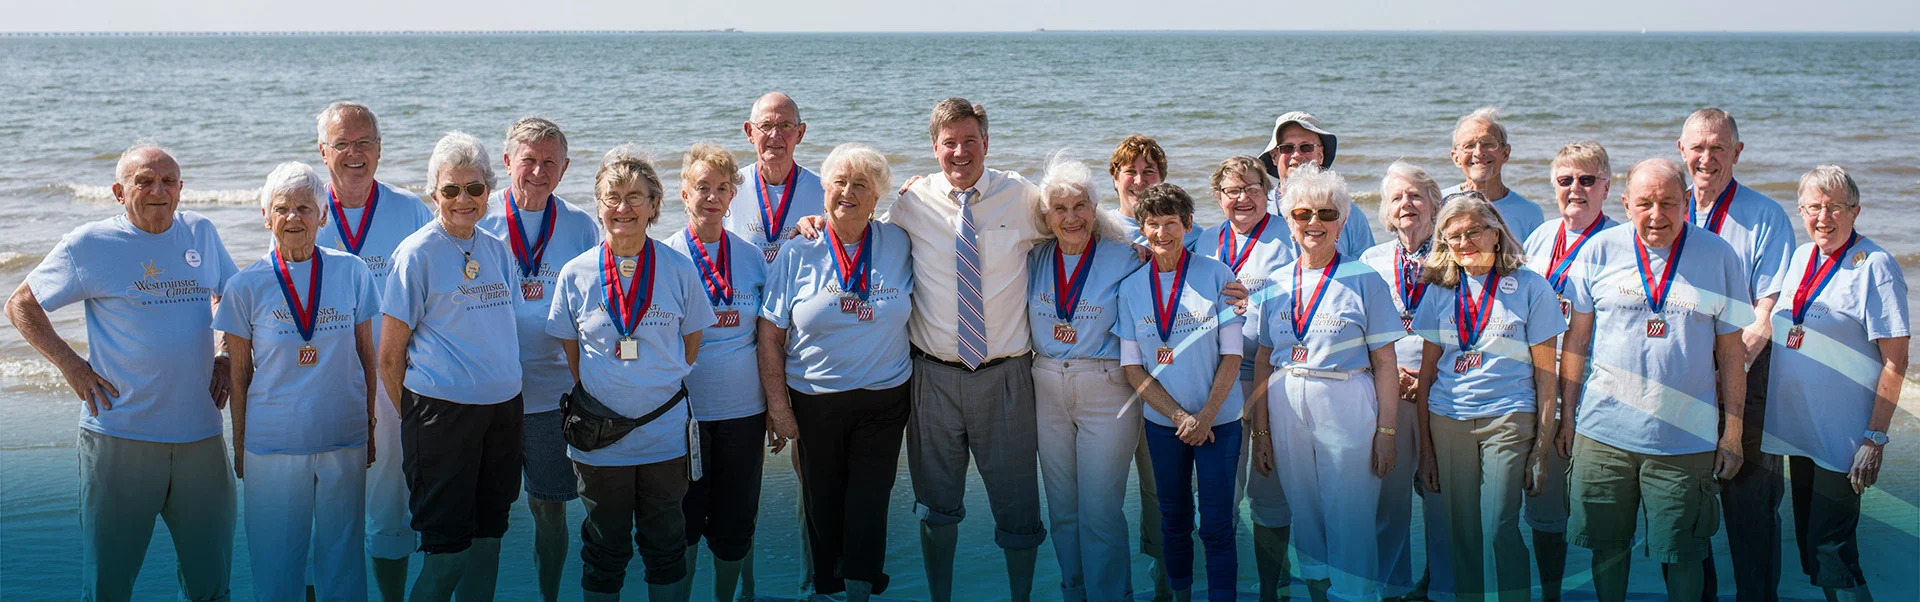 Group of Retired Men and Woman Smiling in Front of the Ocean